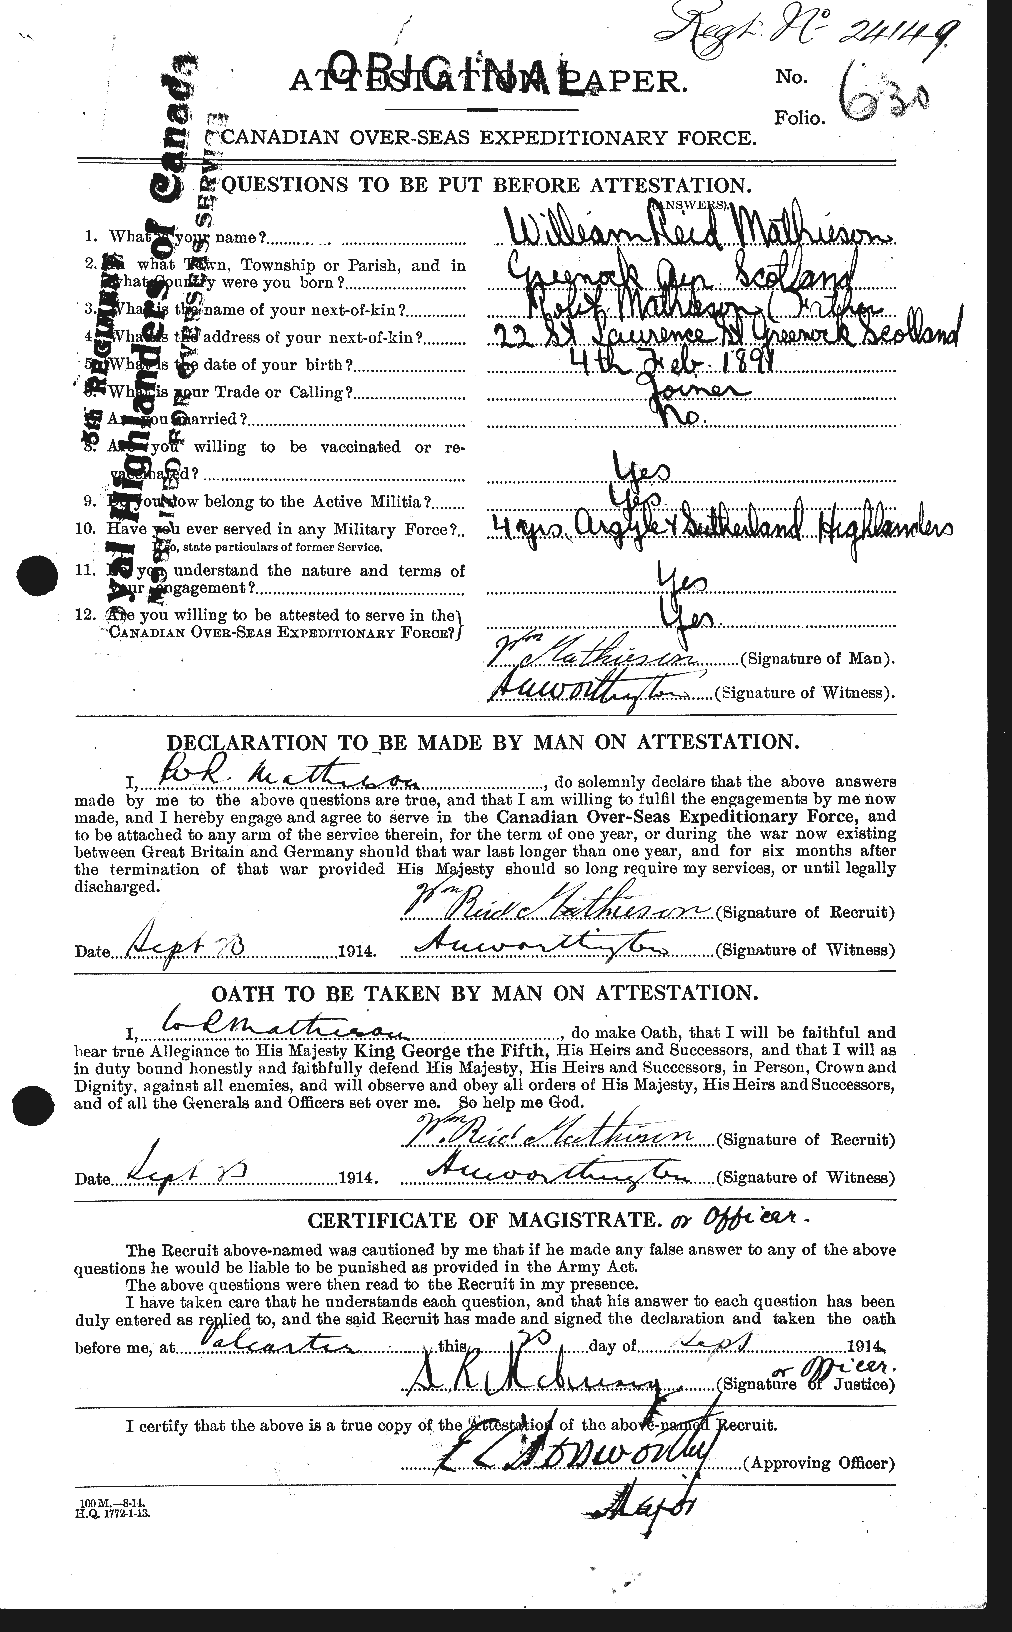 Personnel Records of the First World War - CEF 483812a